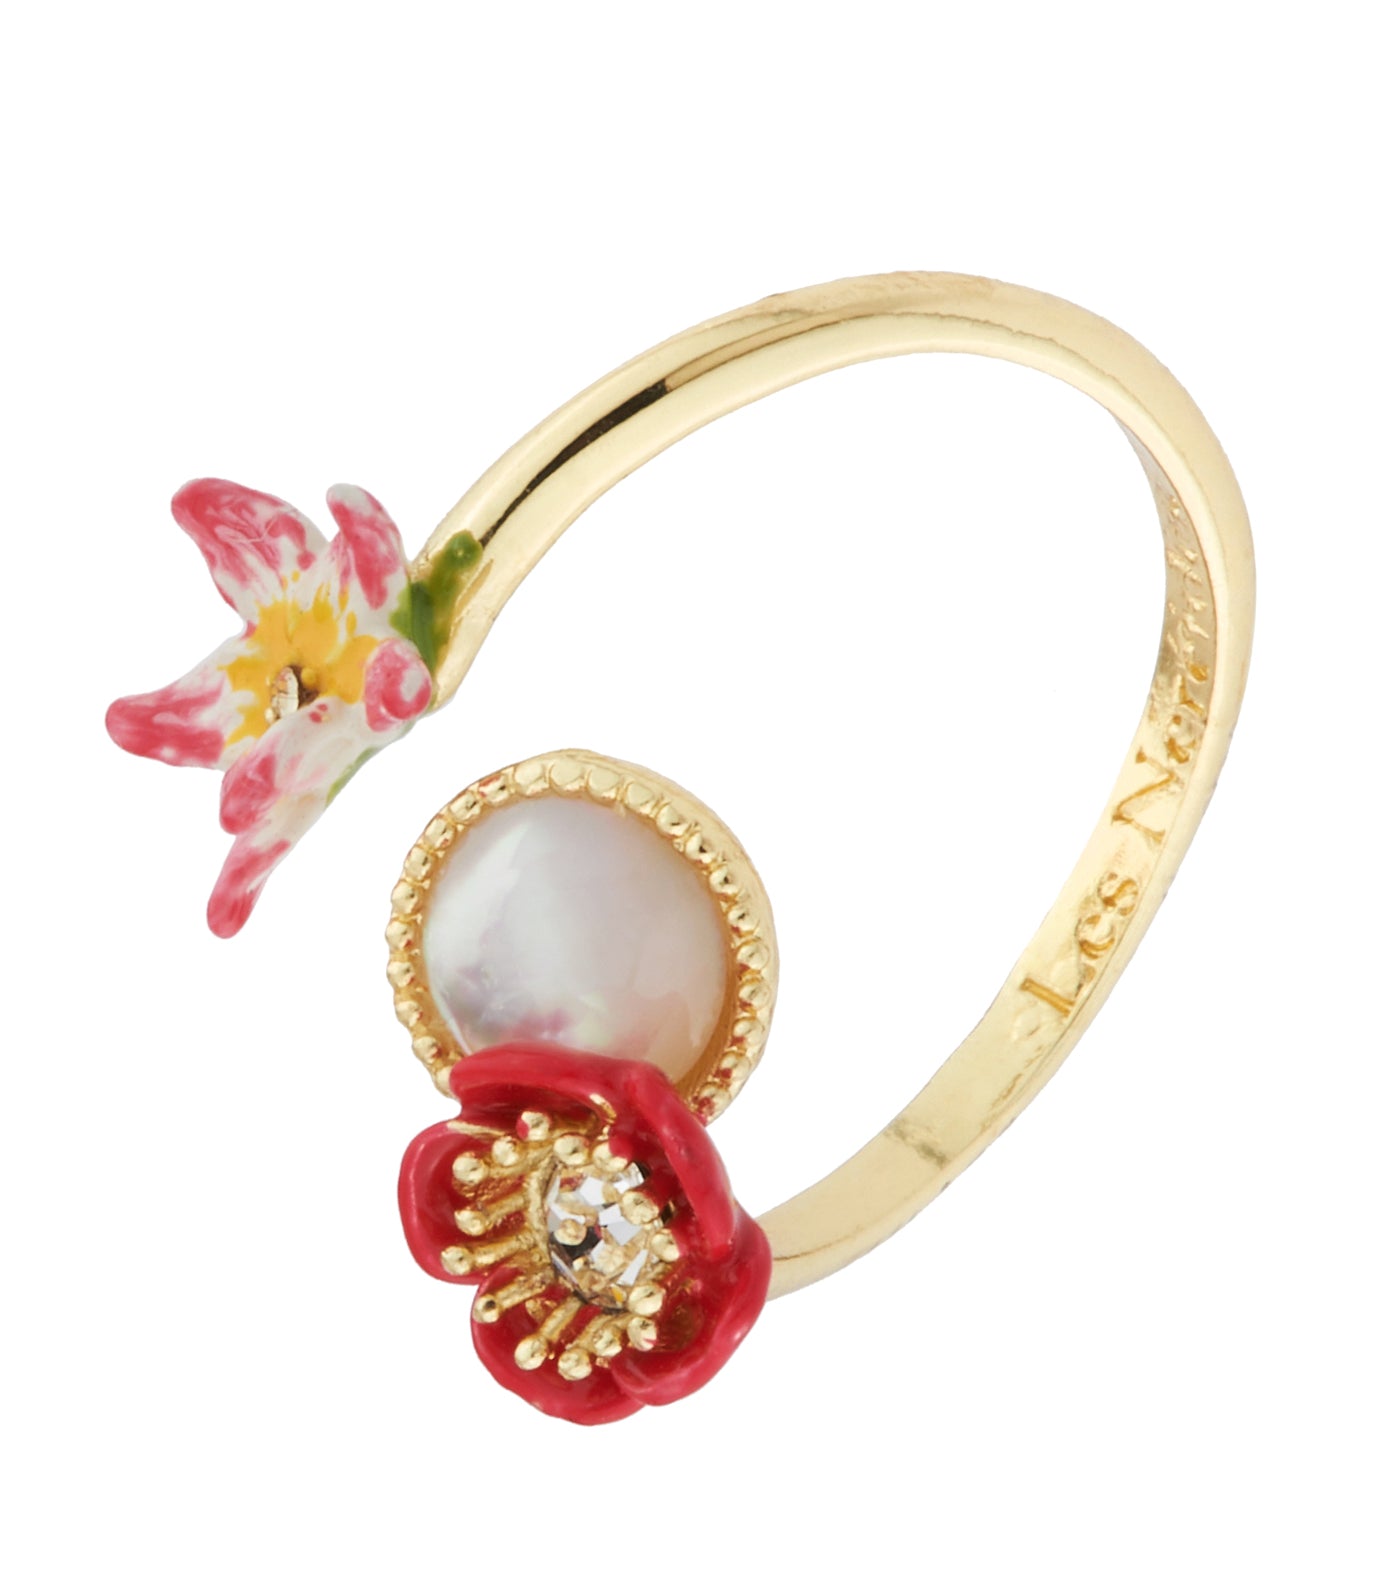 les néréides poppy, white flower, coco-plum and mother-of-pearls adjustable ring